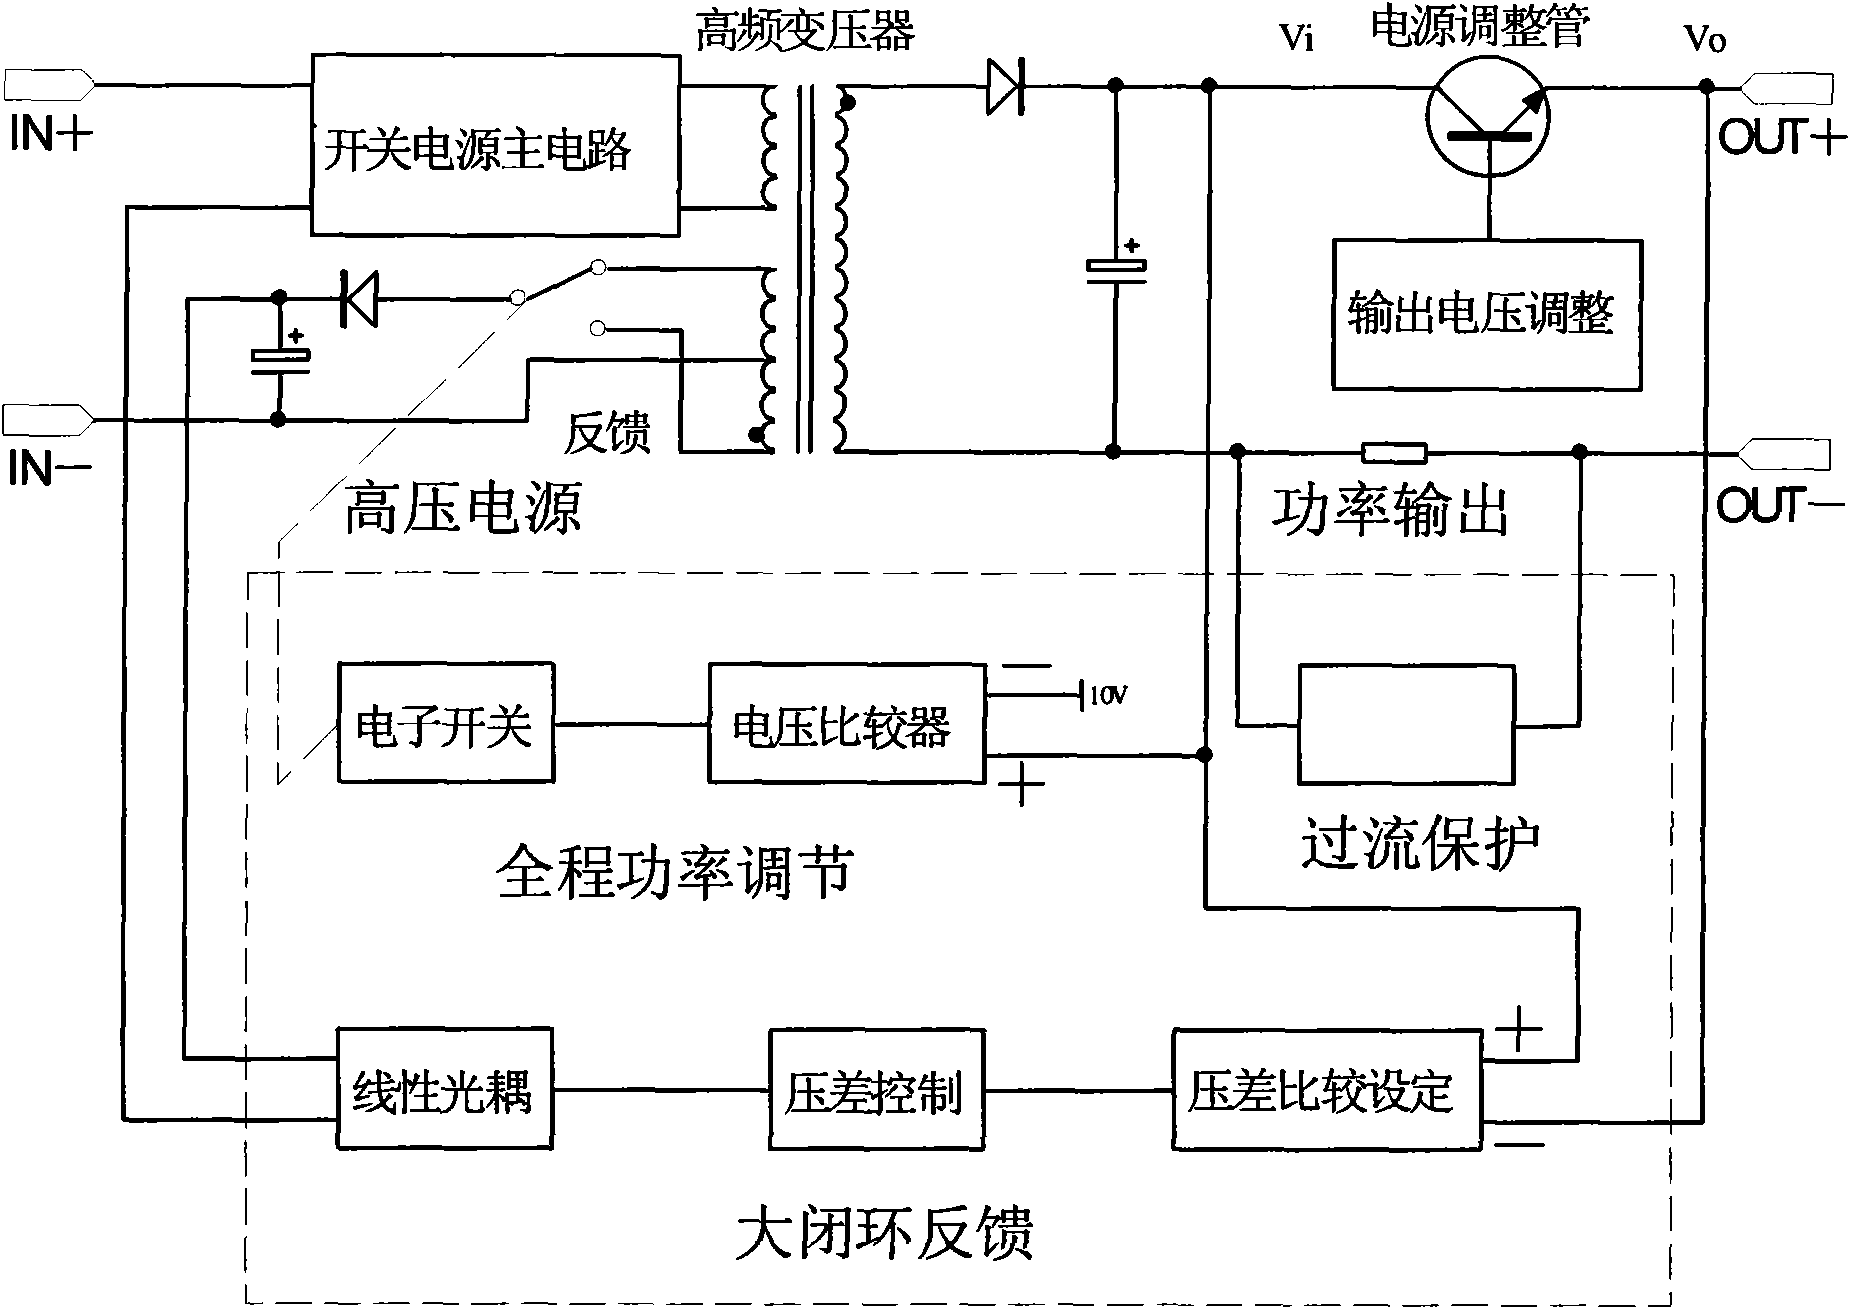 General integration technology for realizing high efficiency of linear power supply